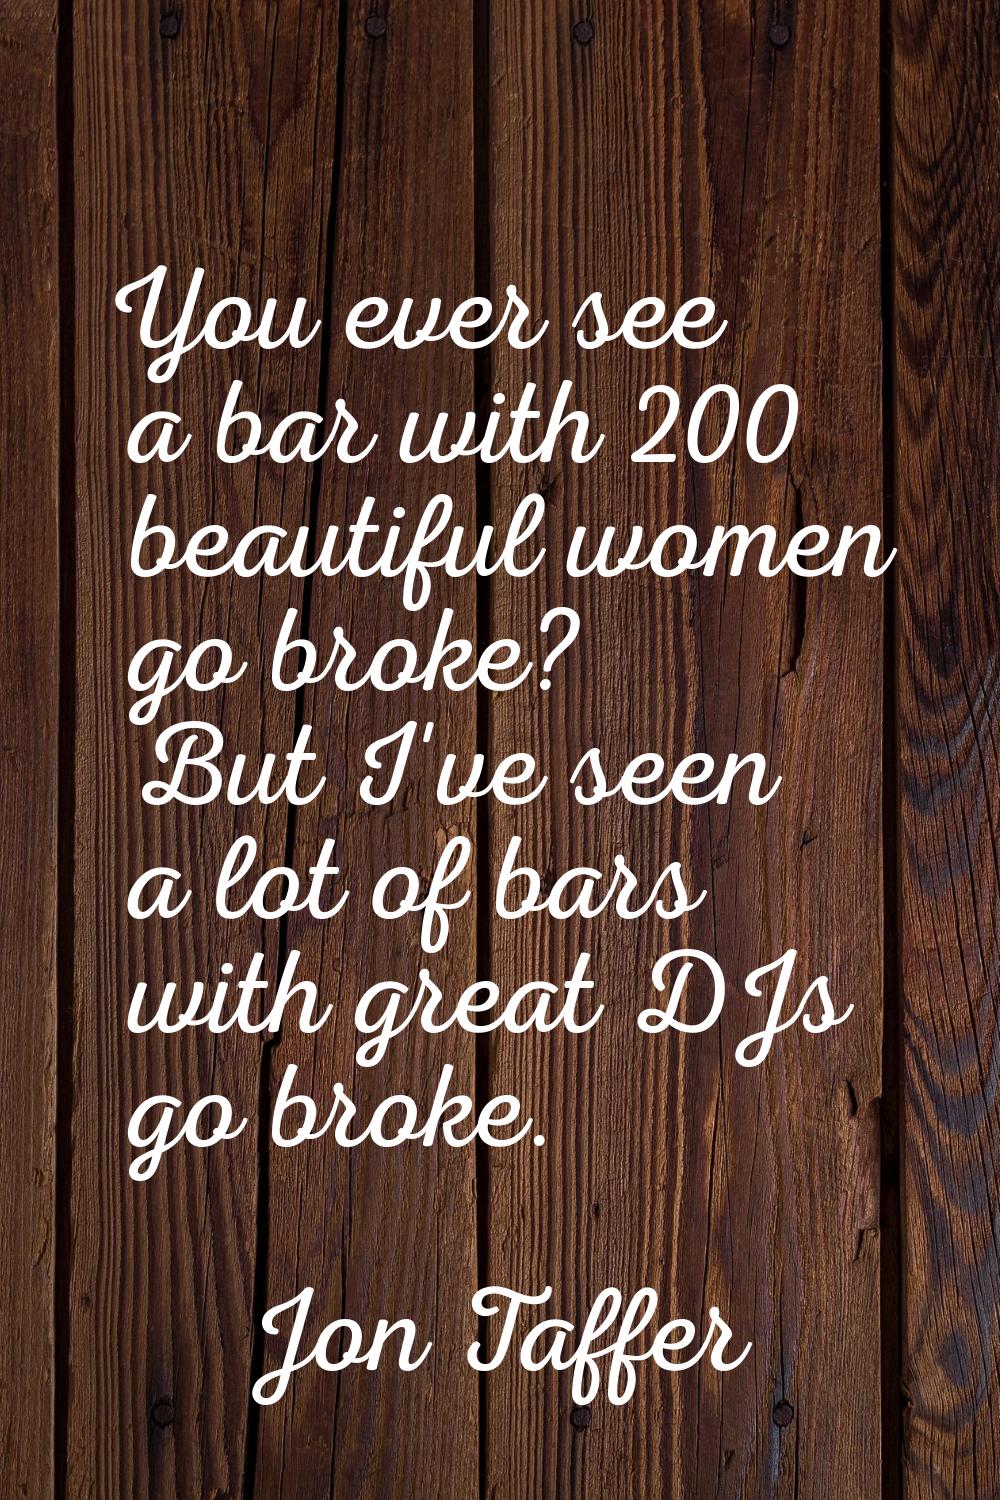 You ever see a bar with 200 beautiful women go broke? But I've seen a lot of bars with great DJs go